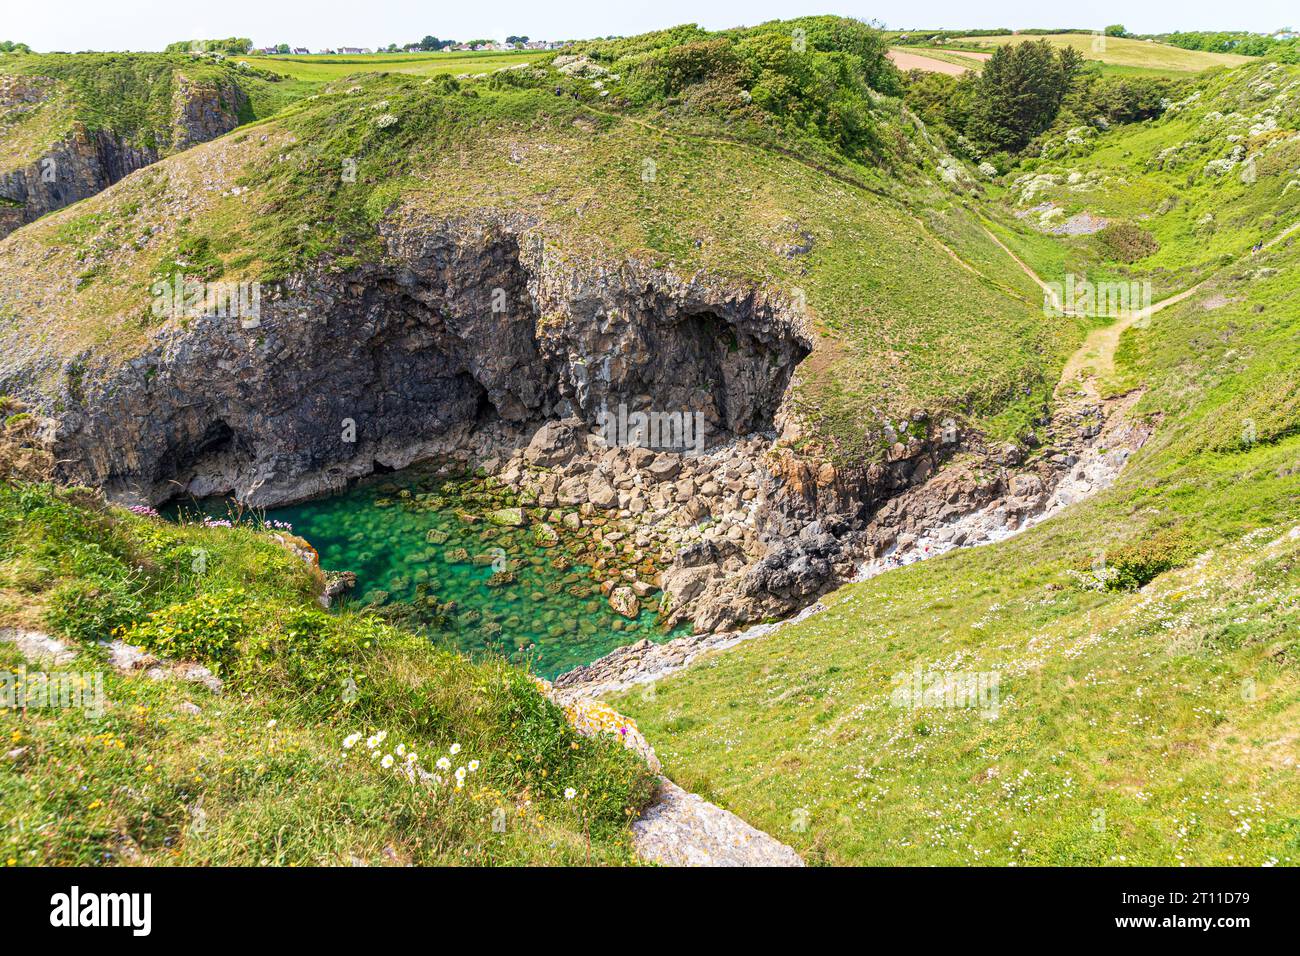 Skrinkle Haven, Lydstep nel Pembrokeshire Coast National Park, West Wales, Regno Unito Foto Stock